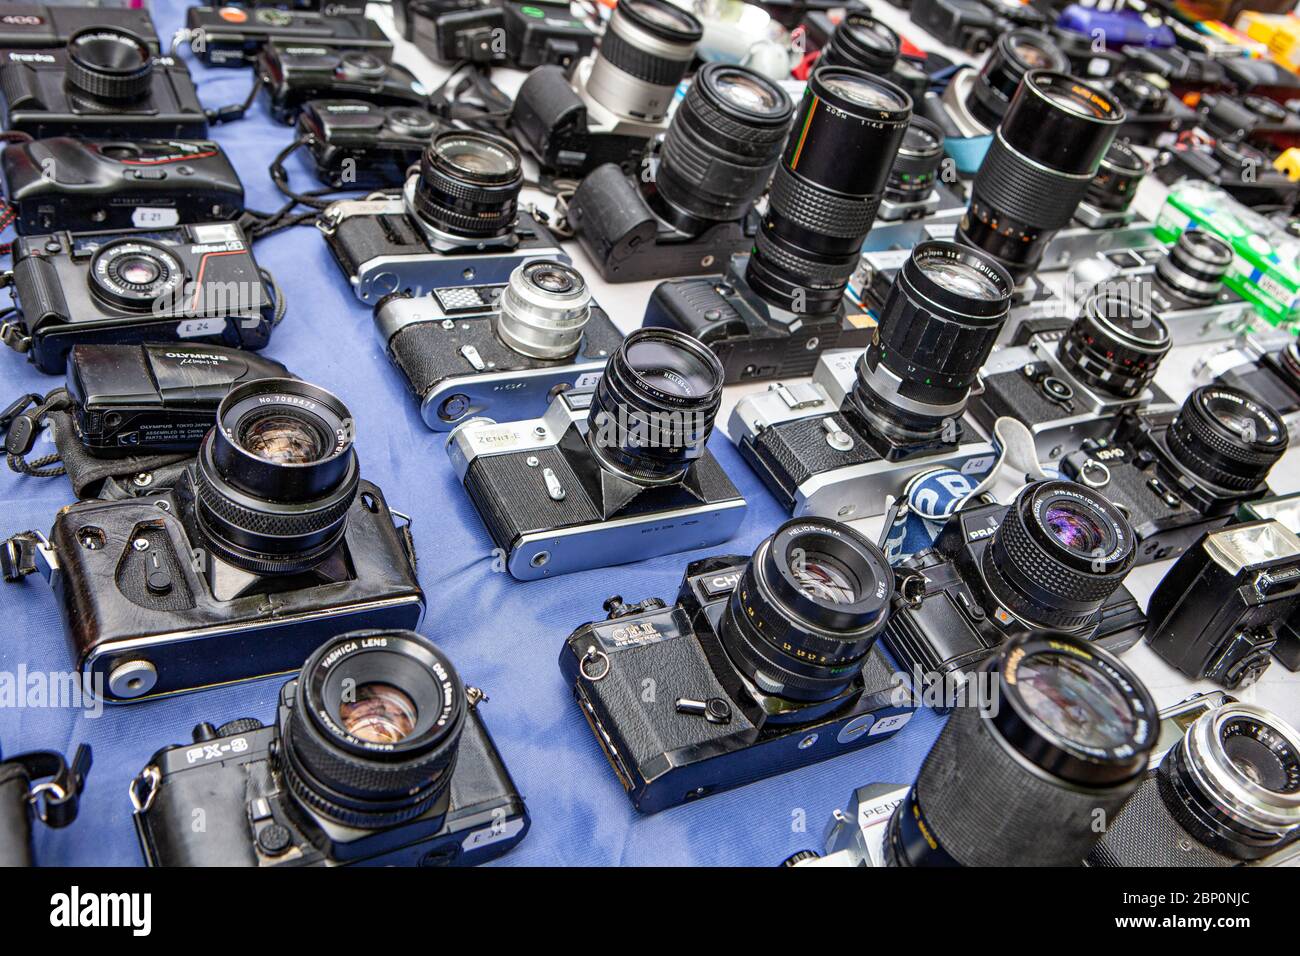 Old analogue film cameras for sale on a market stall Stock Photo